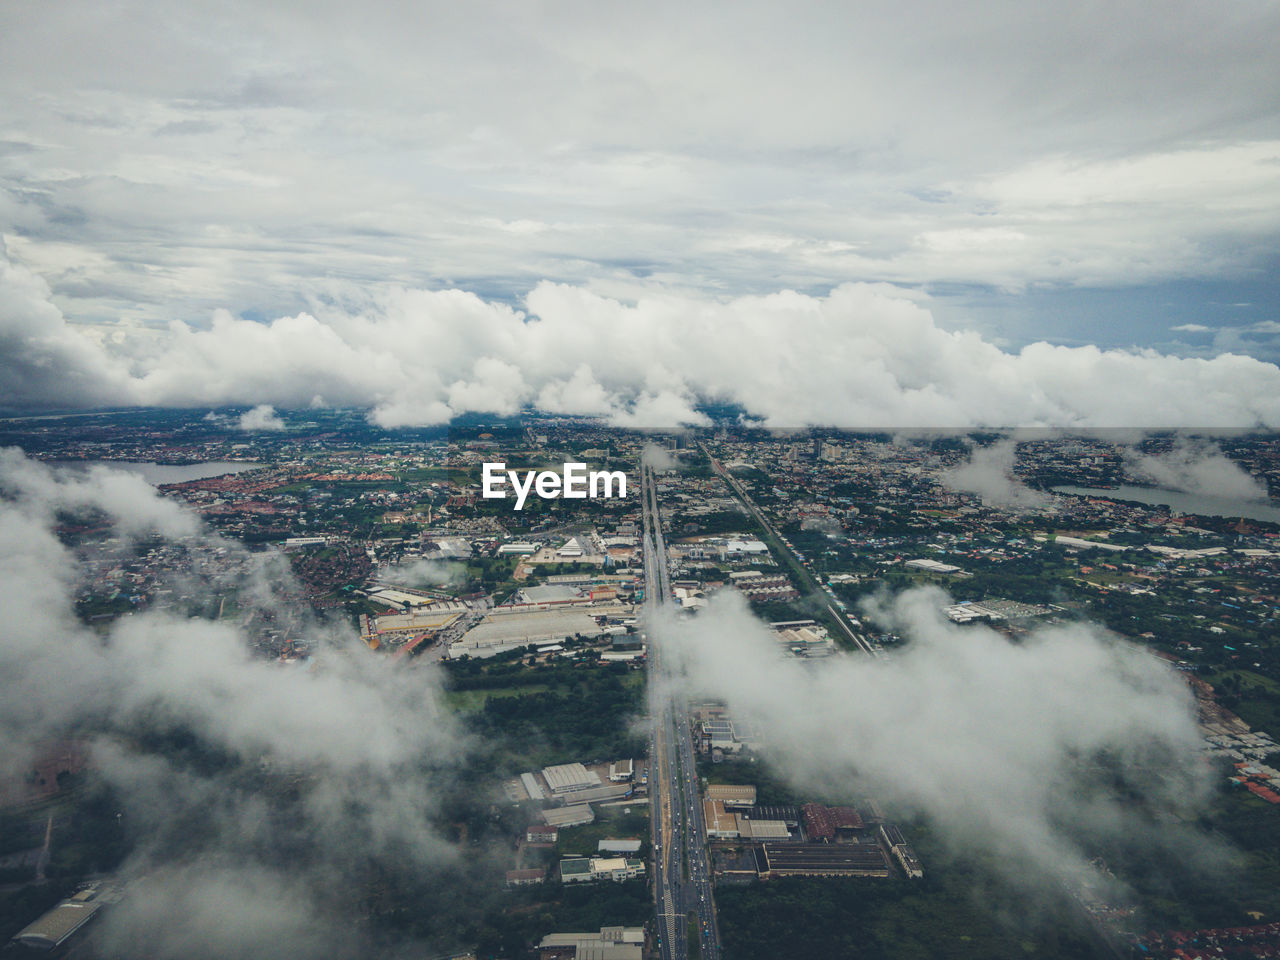 Aerial view from khon kaen province, thailand.